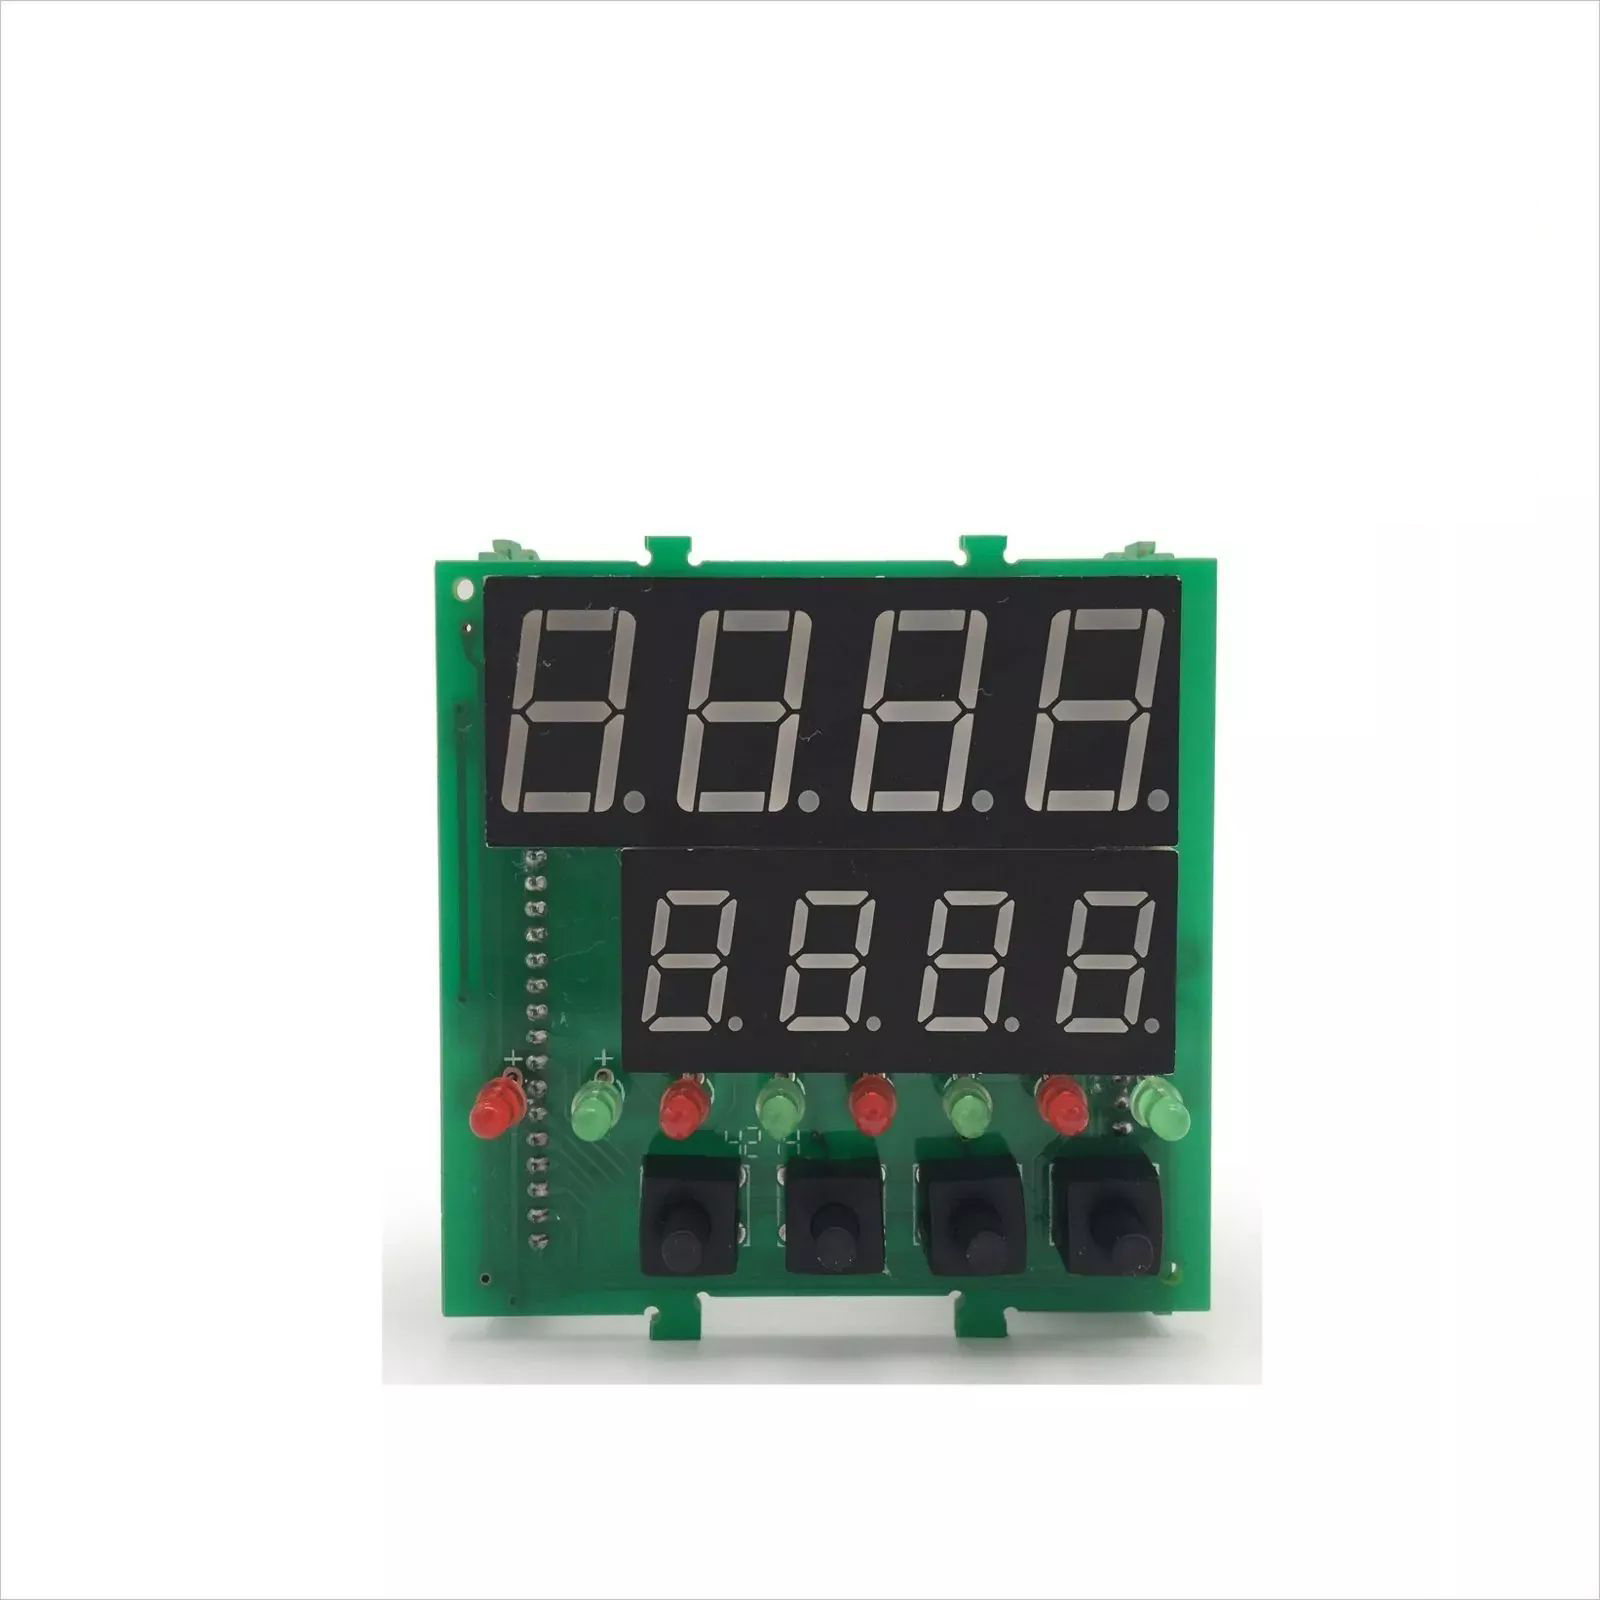 AT908-CD700 Fuzzy control modular intelligent PID multi-function controller